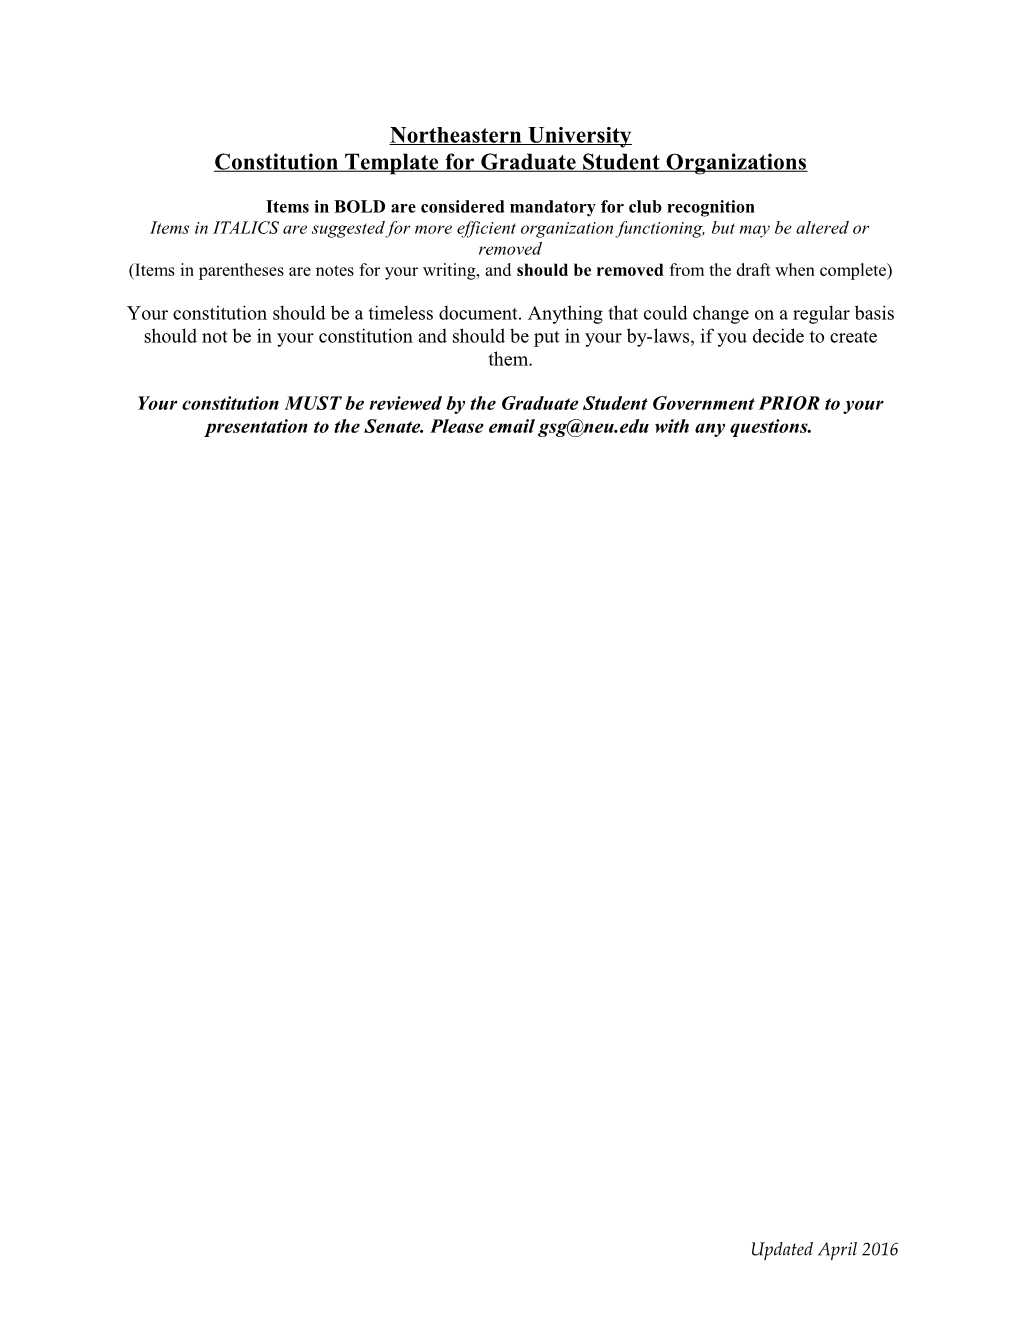 Constitution Template for Graduate Student Organizations